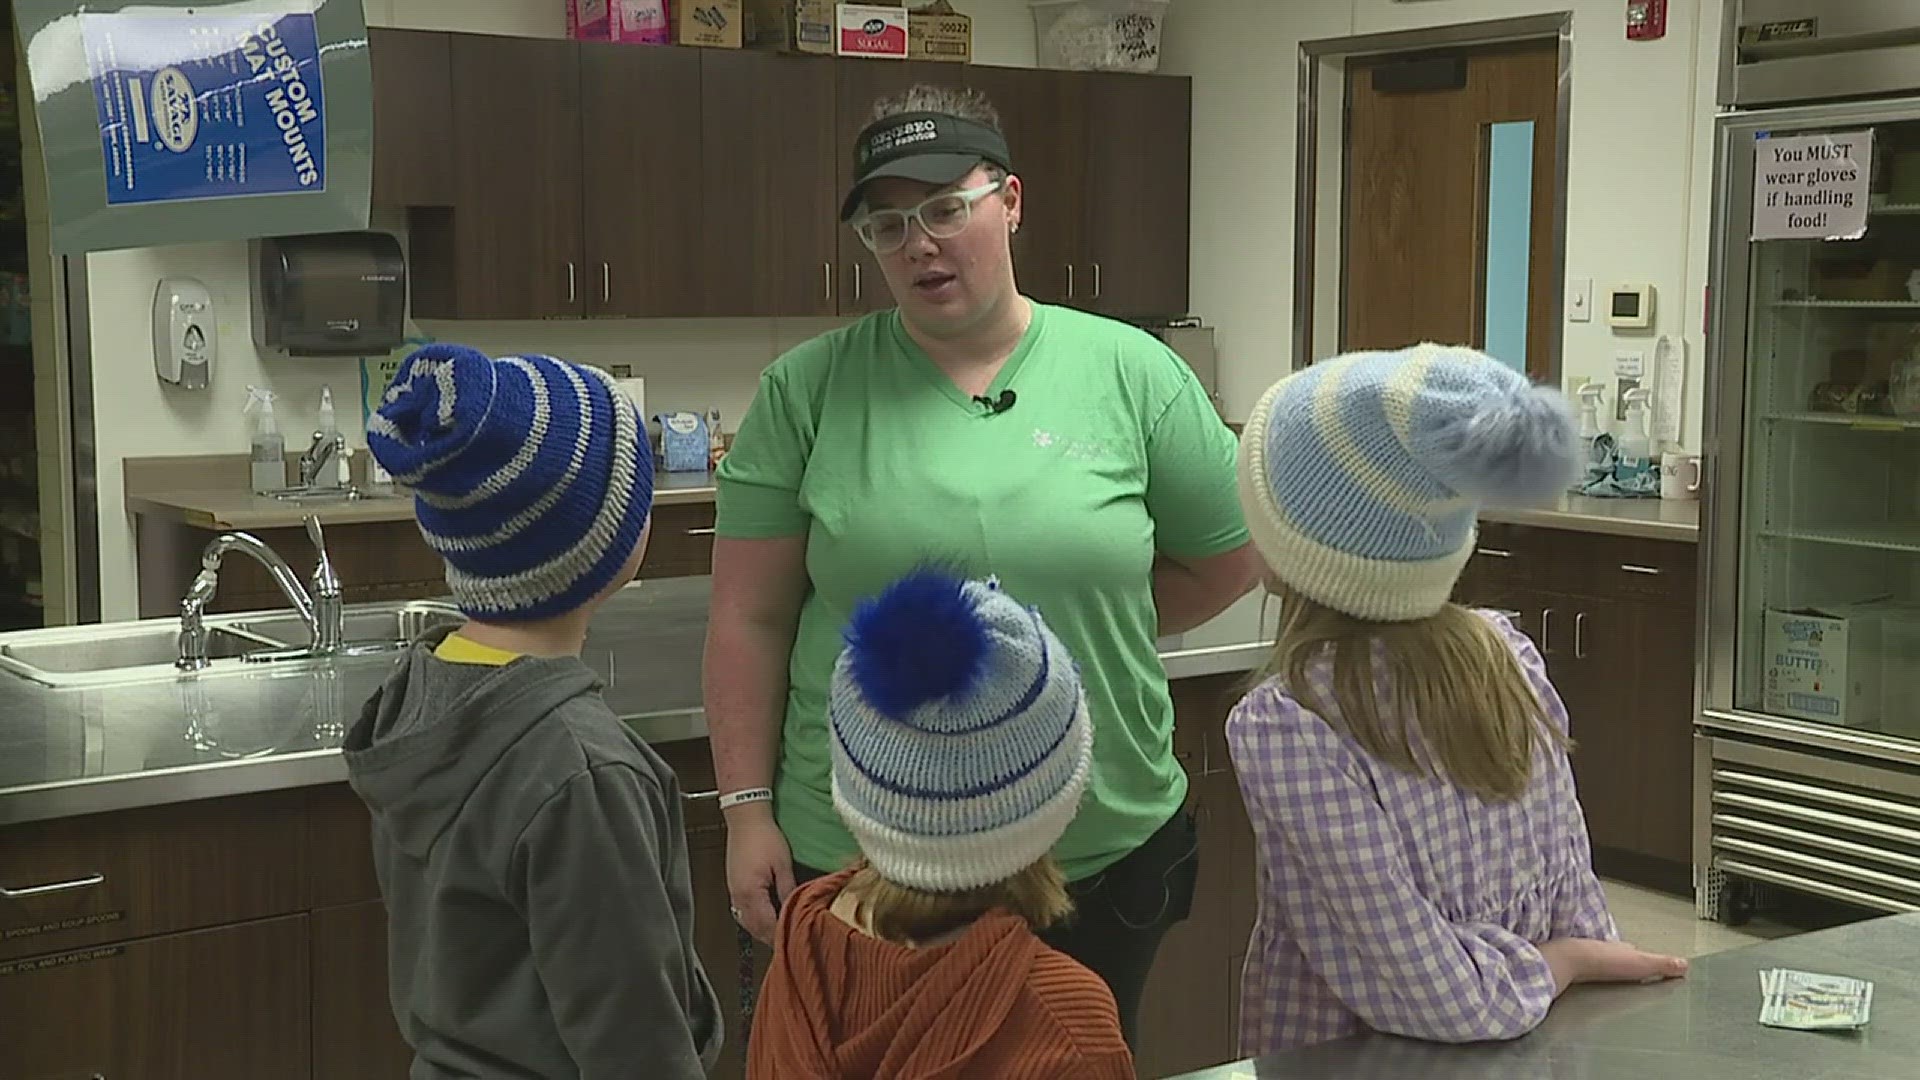 Chelsie Pettie works in the lunch room of St. Malachy School in Geneseo, but her handmade pieces of art make every child feel welcome at school.